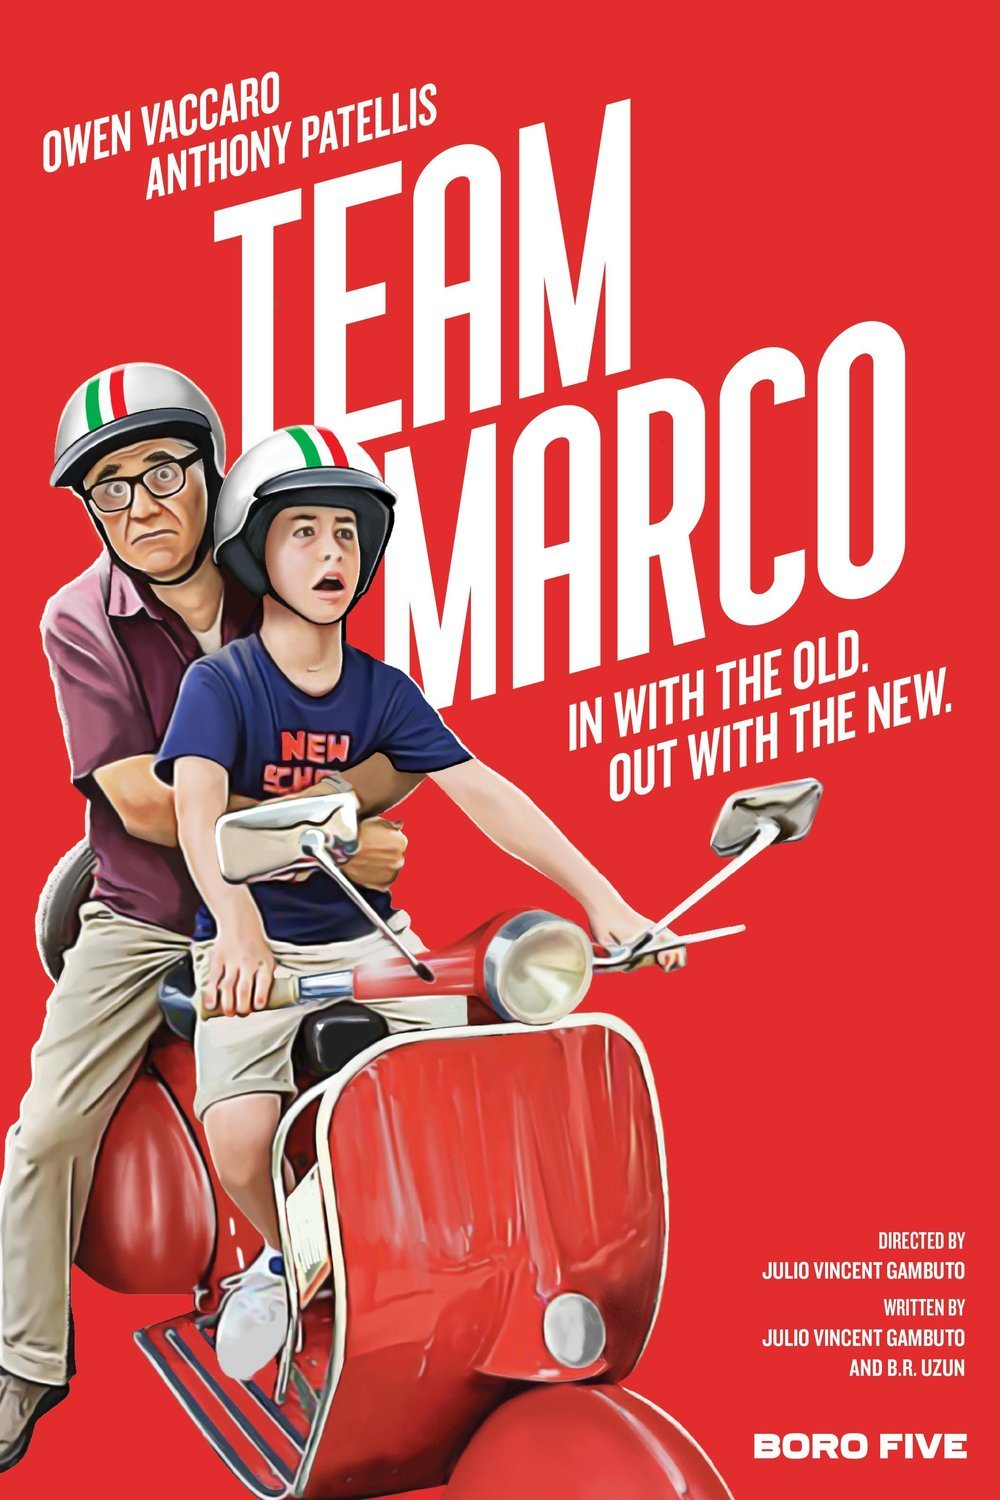 Poster of the movie Team Marco